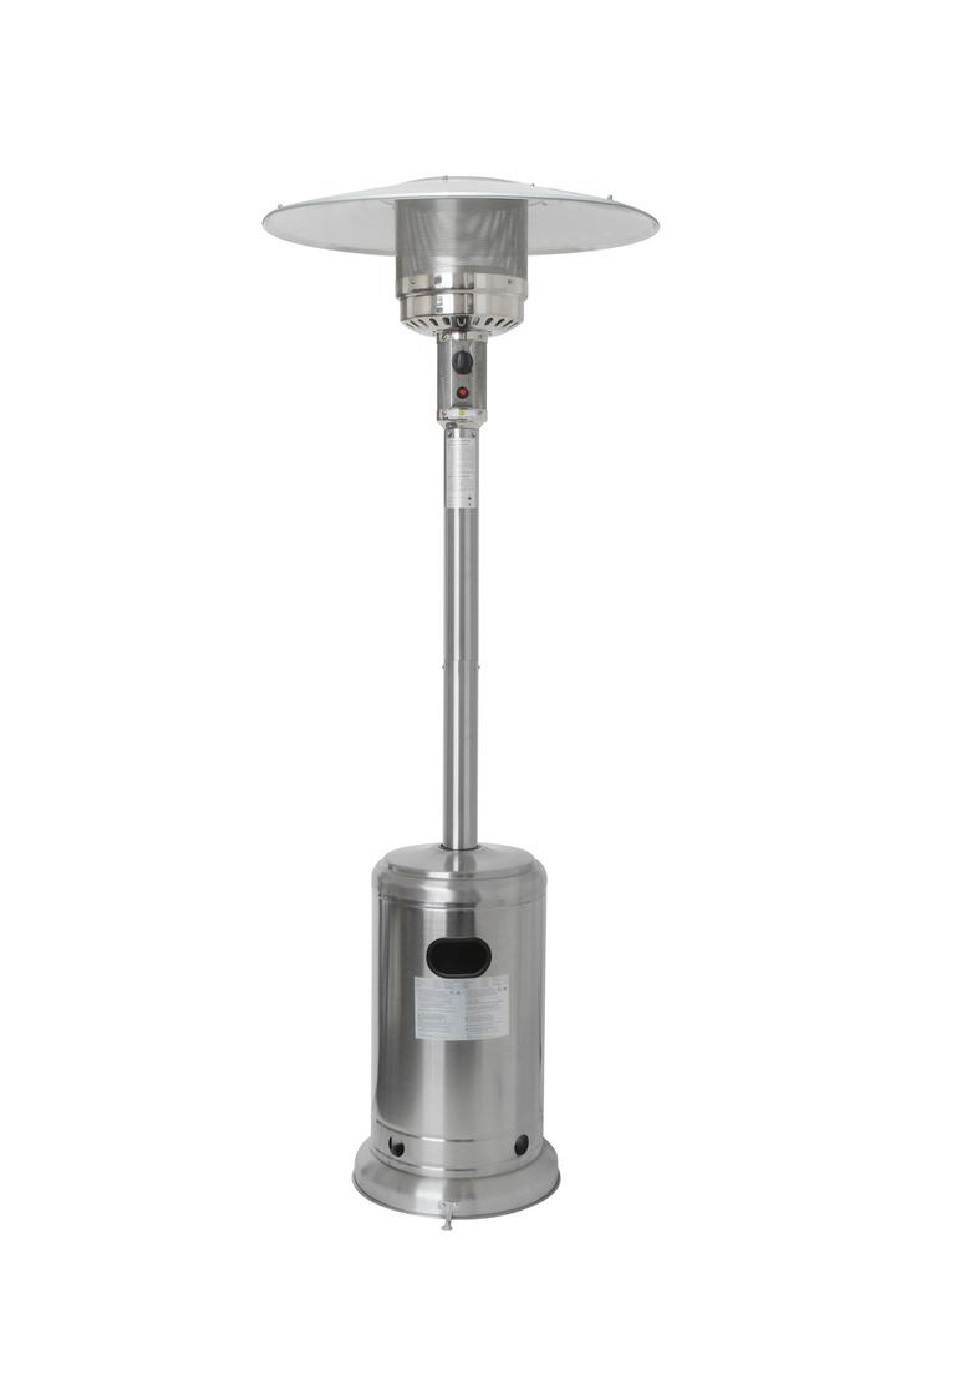 Mushroom Patio Heater Stainless Steel And Black Color